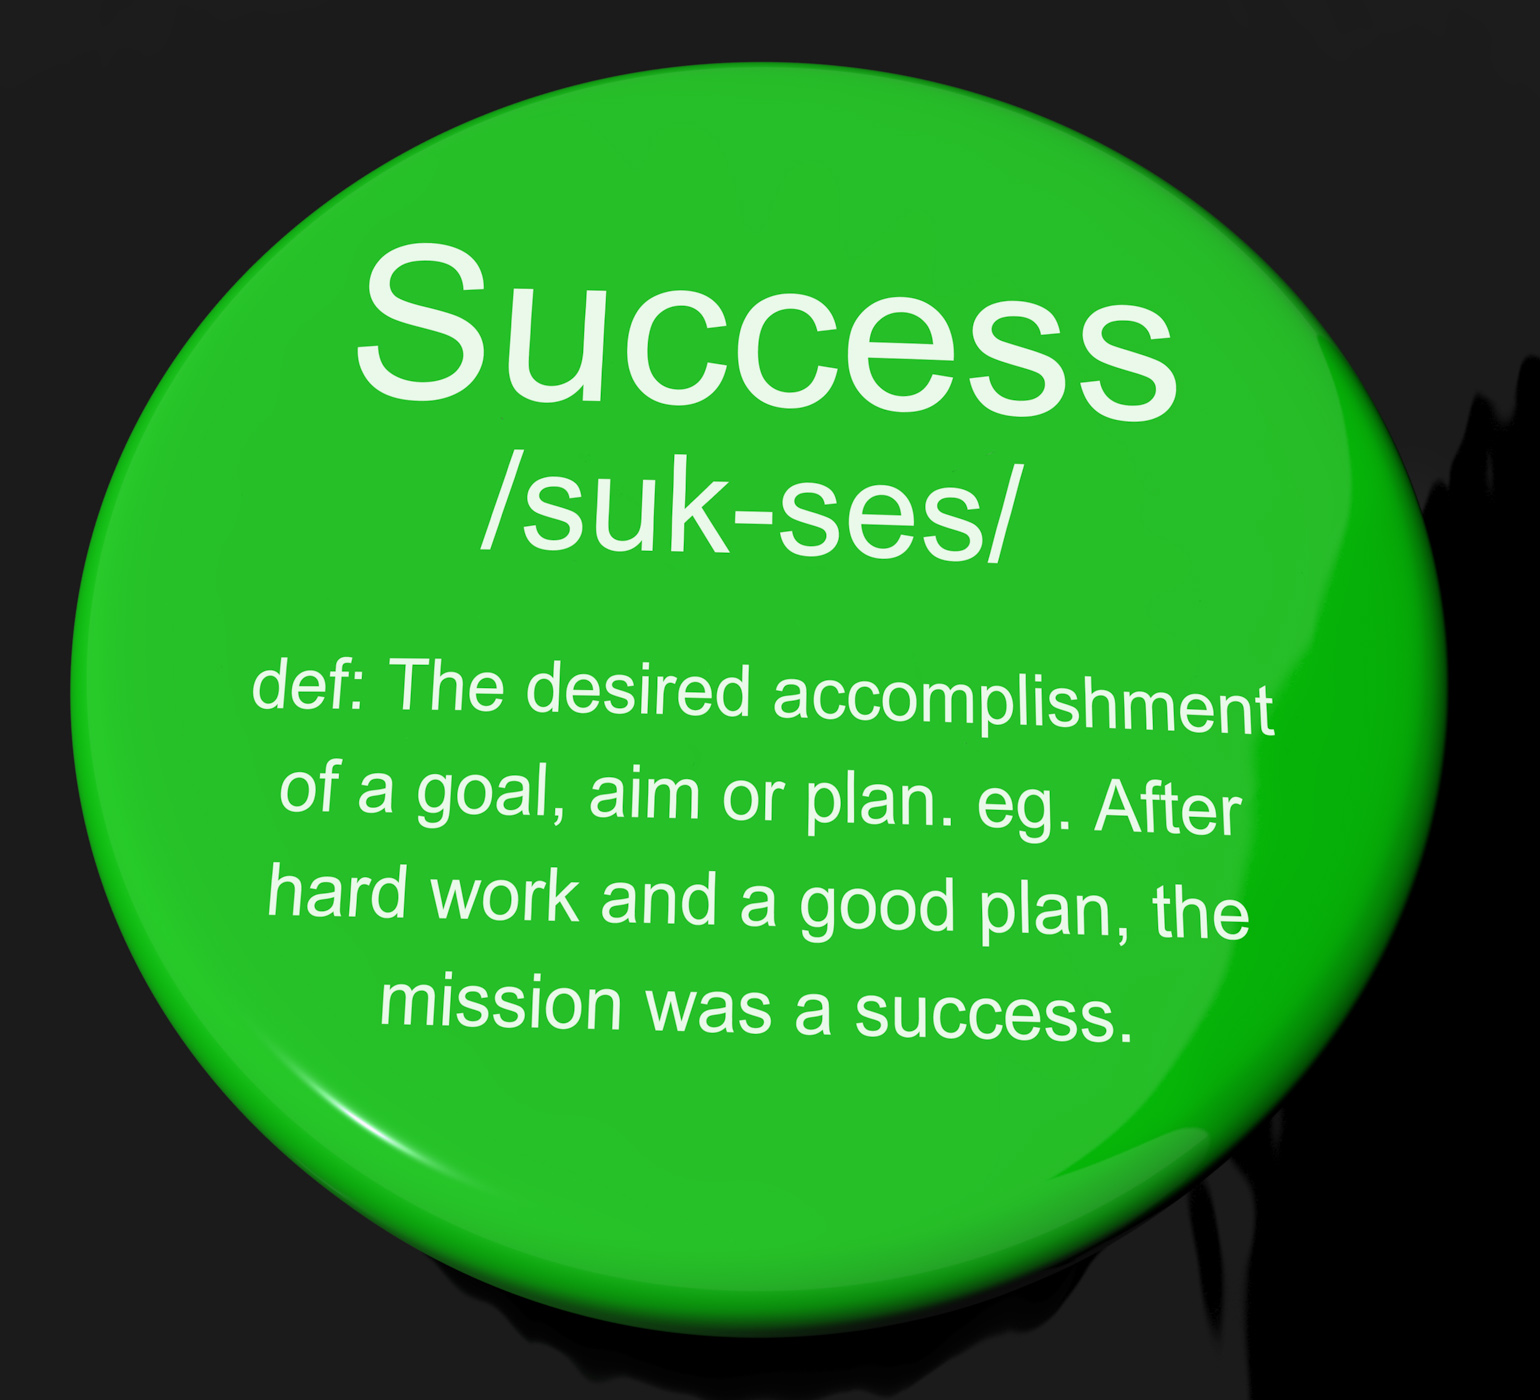 Success definition button showing achievements or attainment of wealth photo